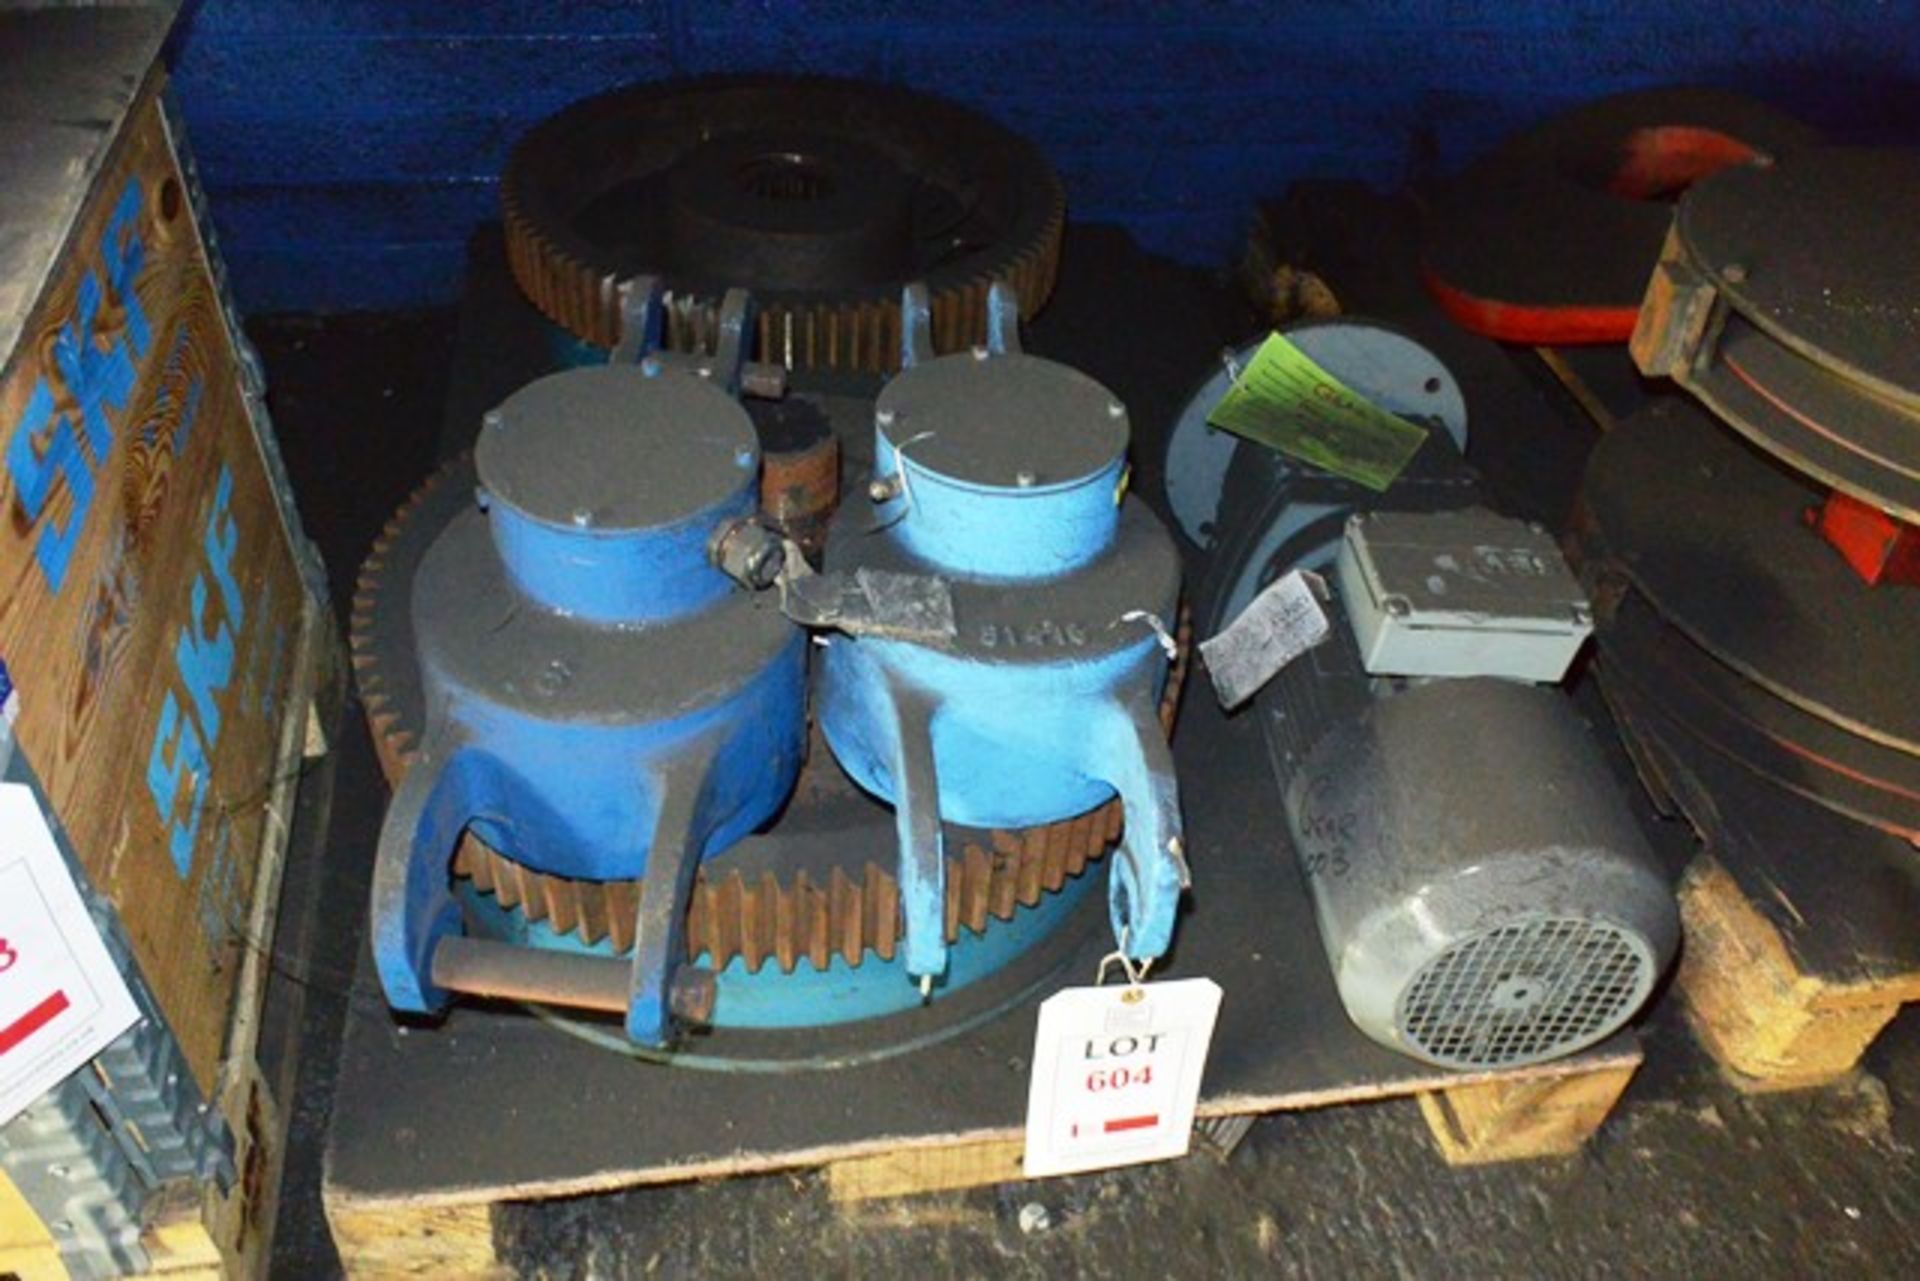 Contents of pallet to include SEW electric motor and fitted gear, steel gantry cogs, etc.